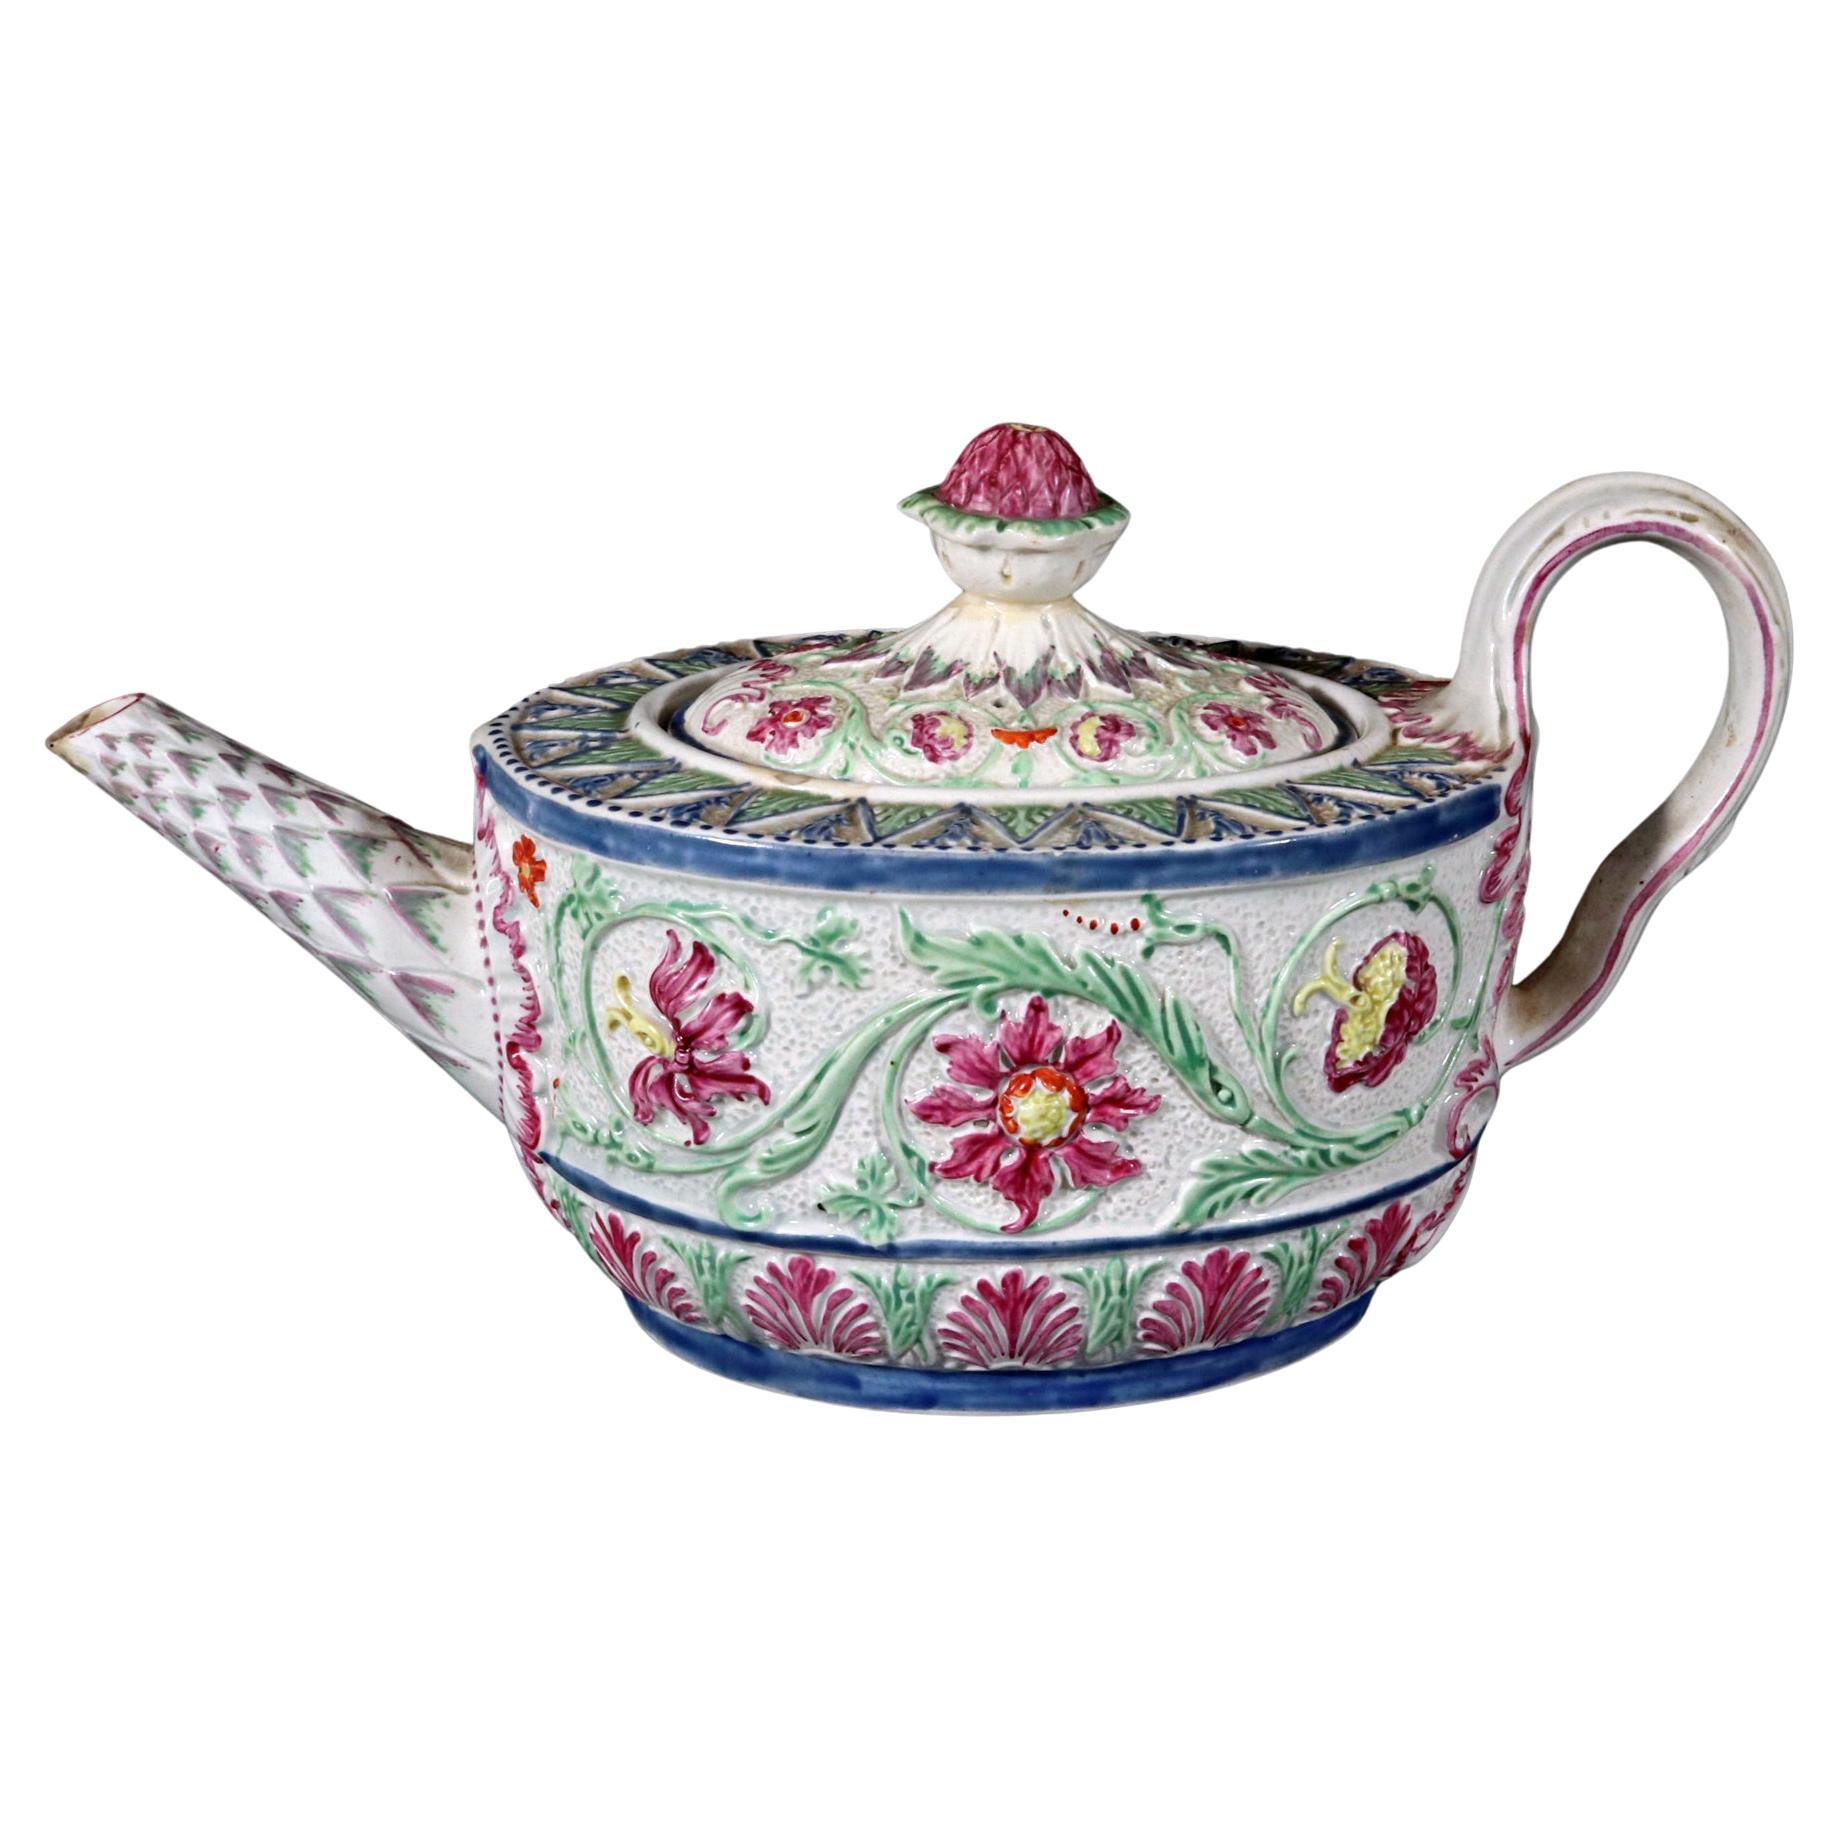 Outstanding Molded Painted Pearlware Teapot & Cover, Possibly Wilson For Sale